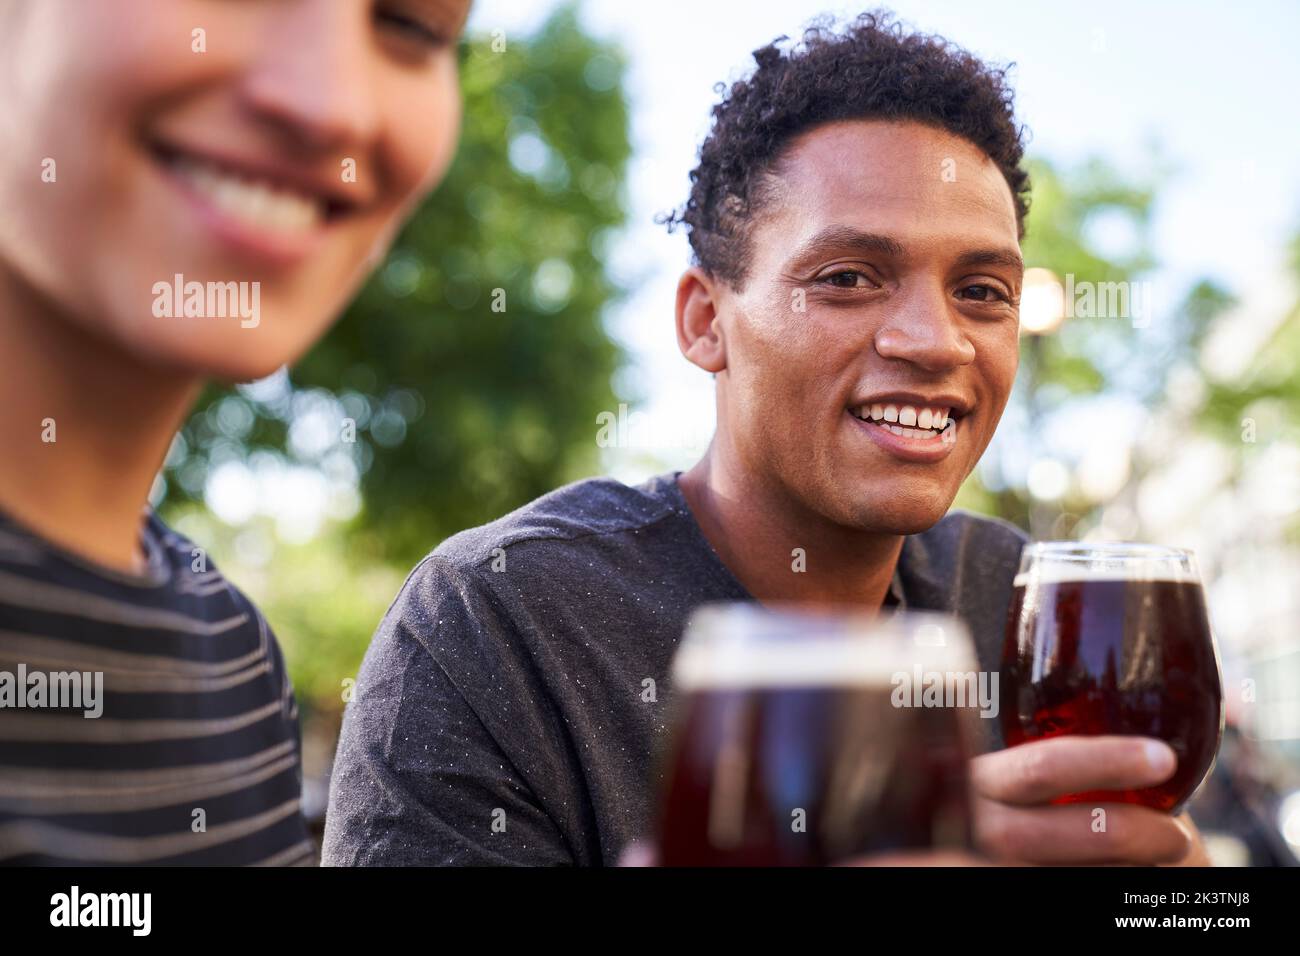 Portrait of happy young African-American man smiling at camera while holding a glass of beer Stock Photo